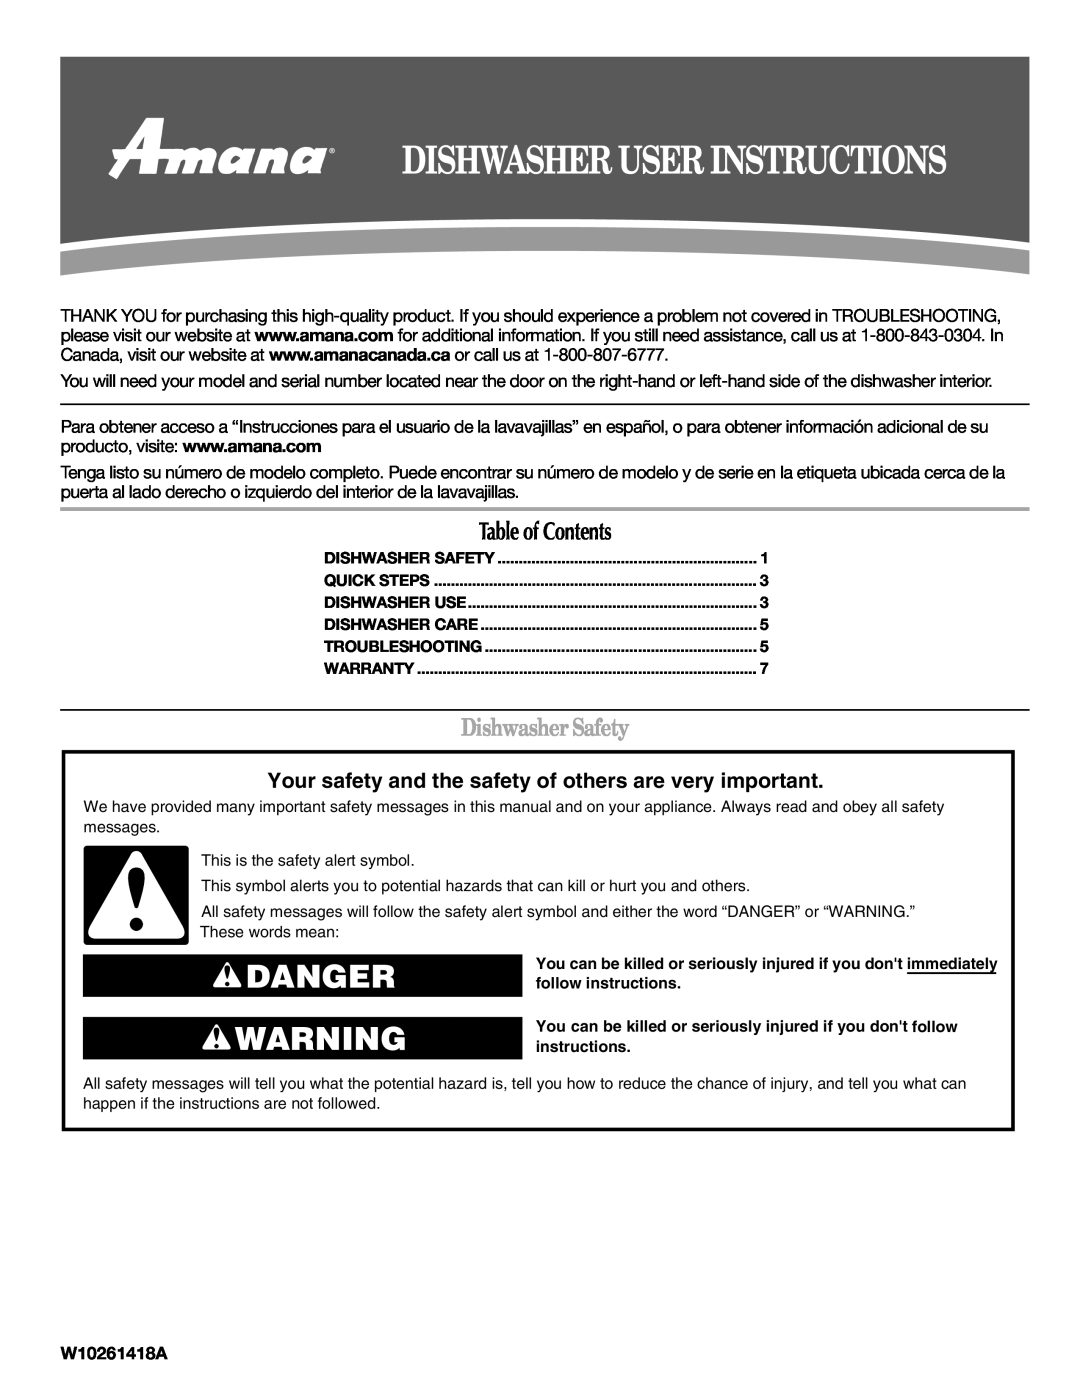 Amana W10261419A warranty Dishwasher User Instructions, Danger, Dishwasher Safety, W10261418A, Table of Contents 